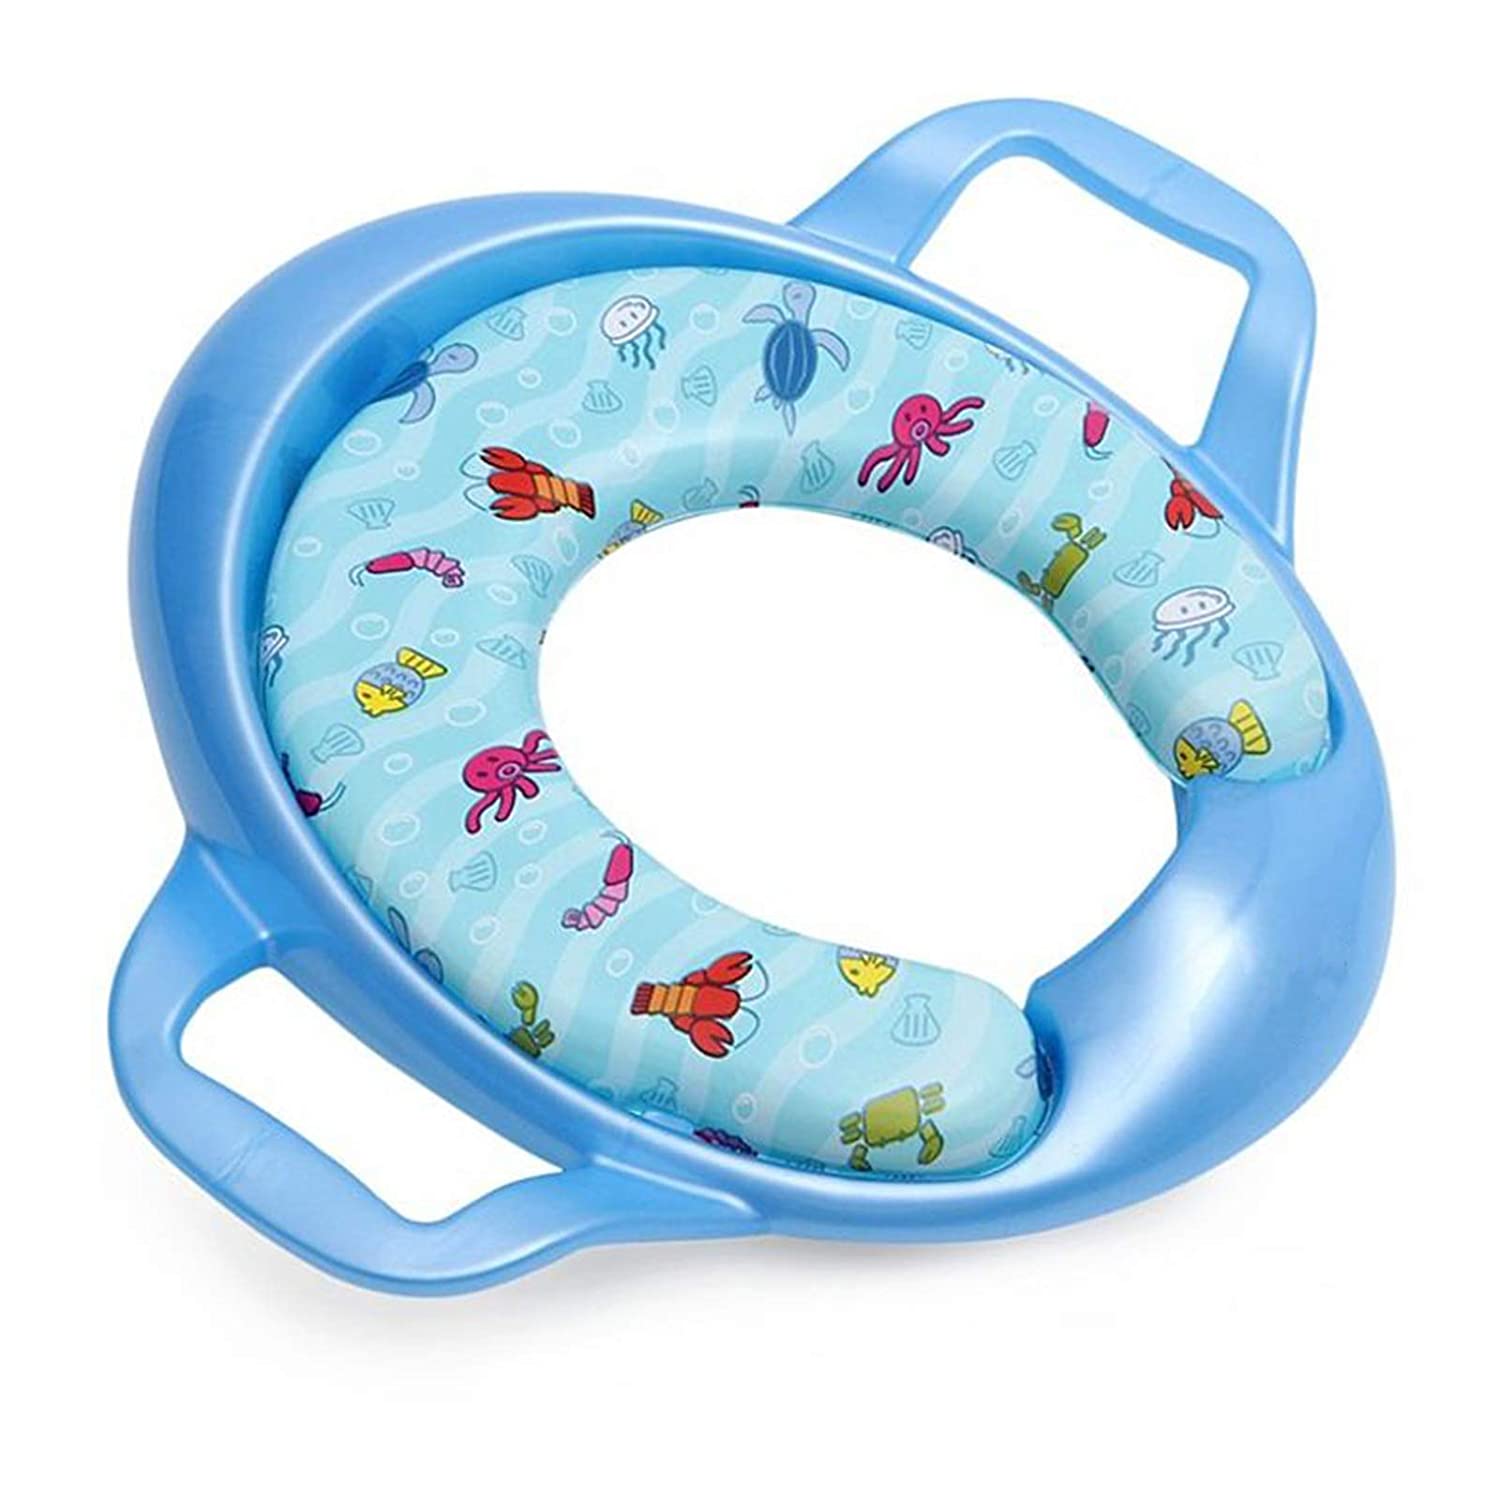 toilet seat for 4 month baby Baby soft toilet training seat cushion child seat with handles baby